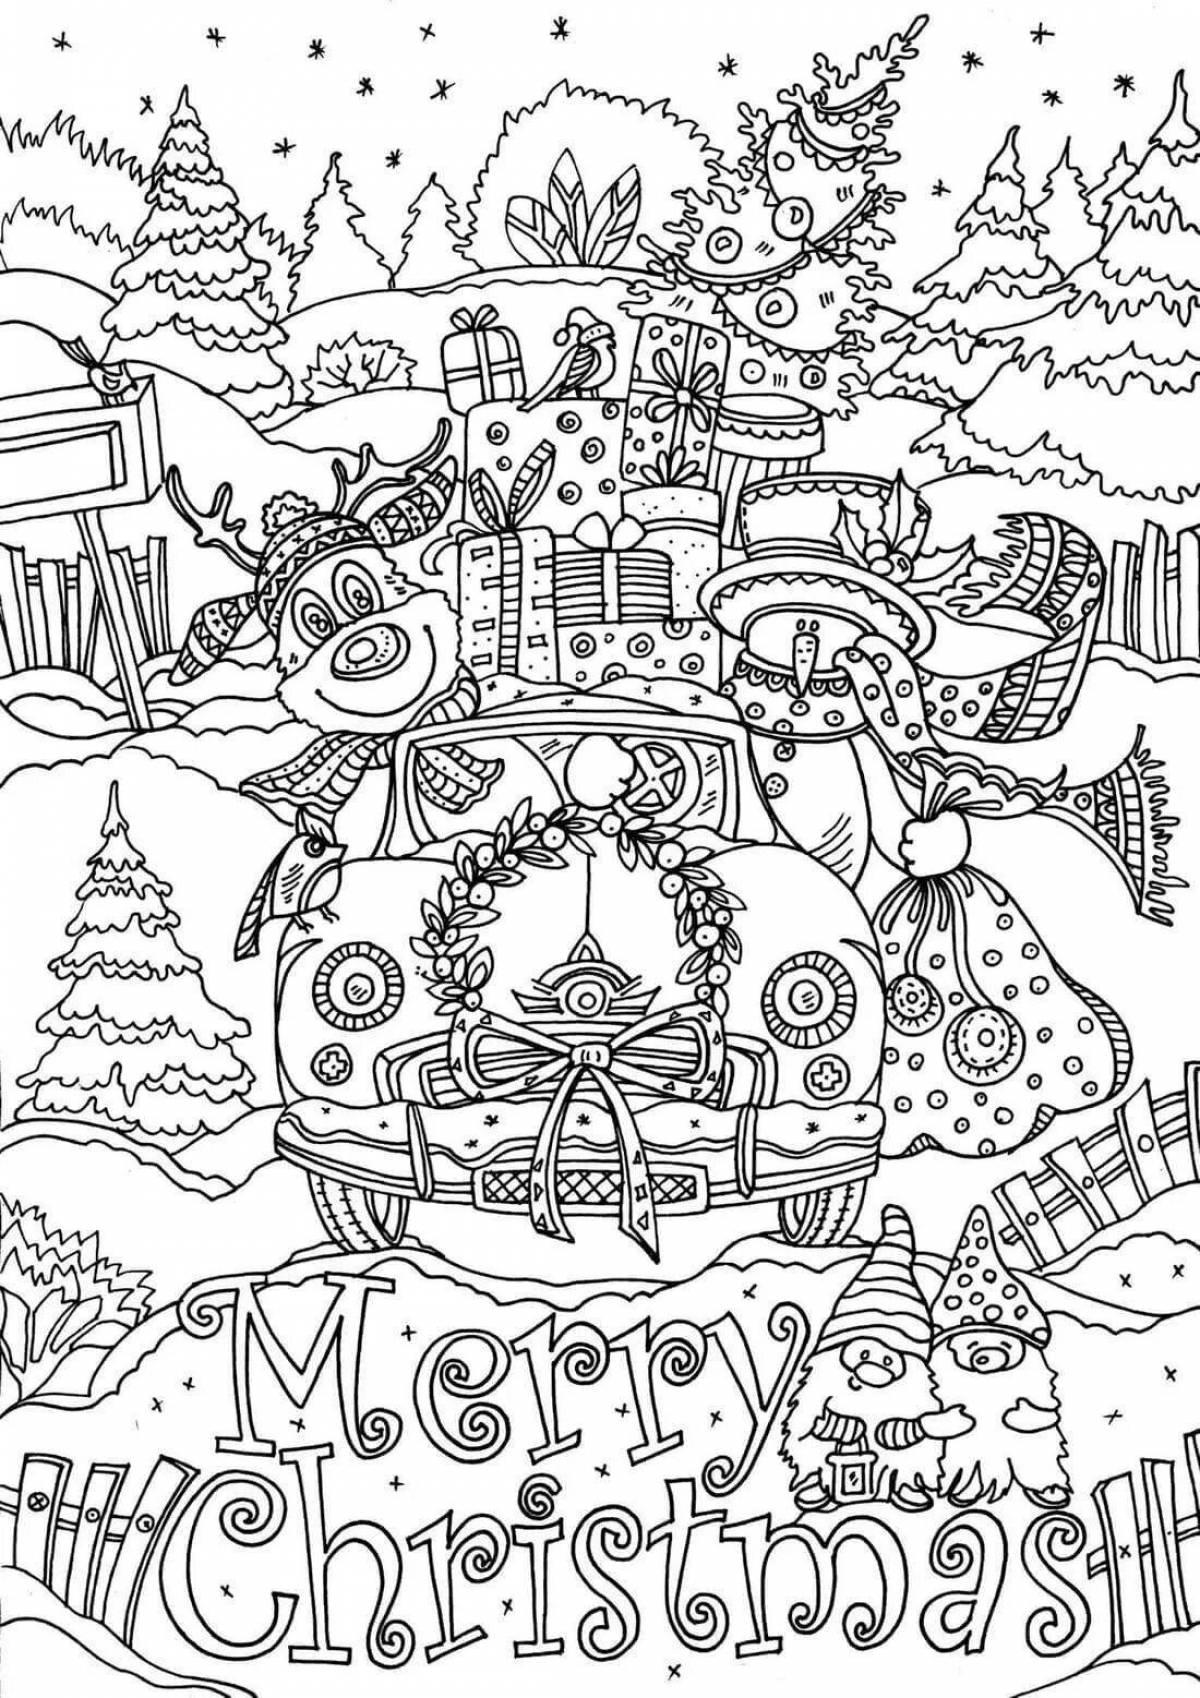 Detailed Christmas coloring book